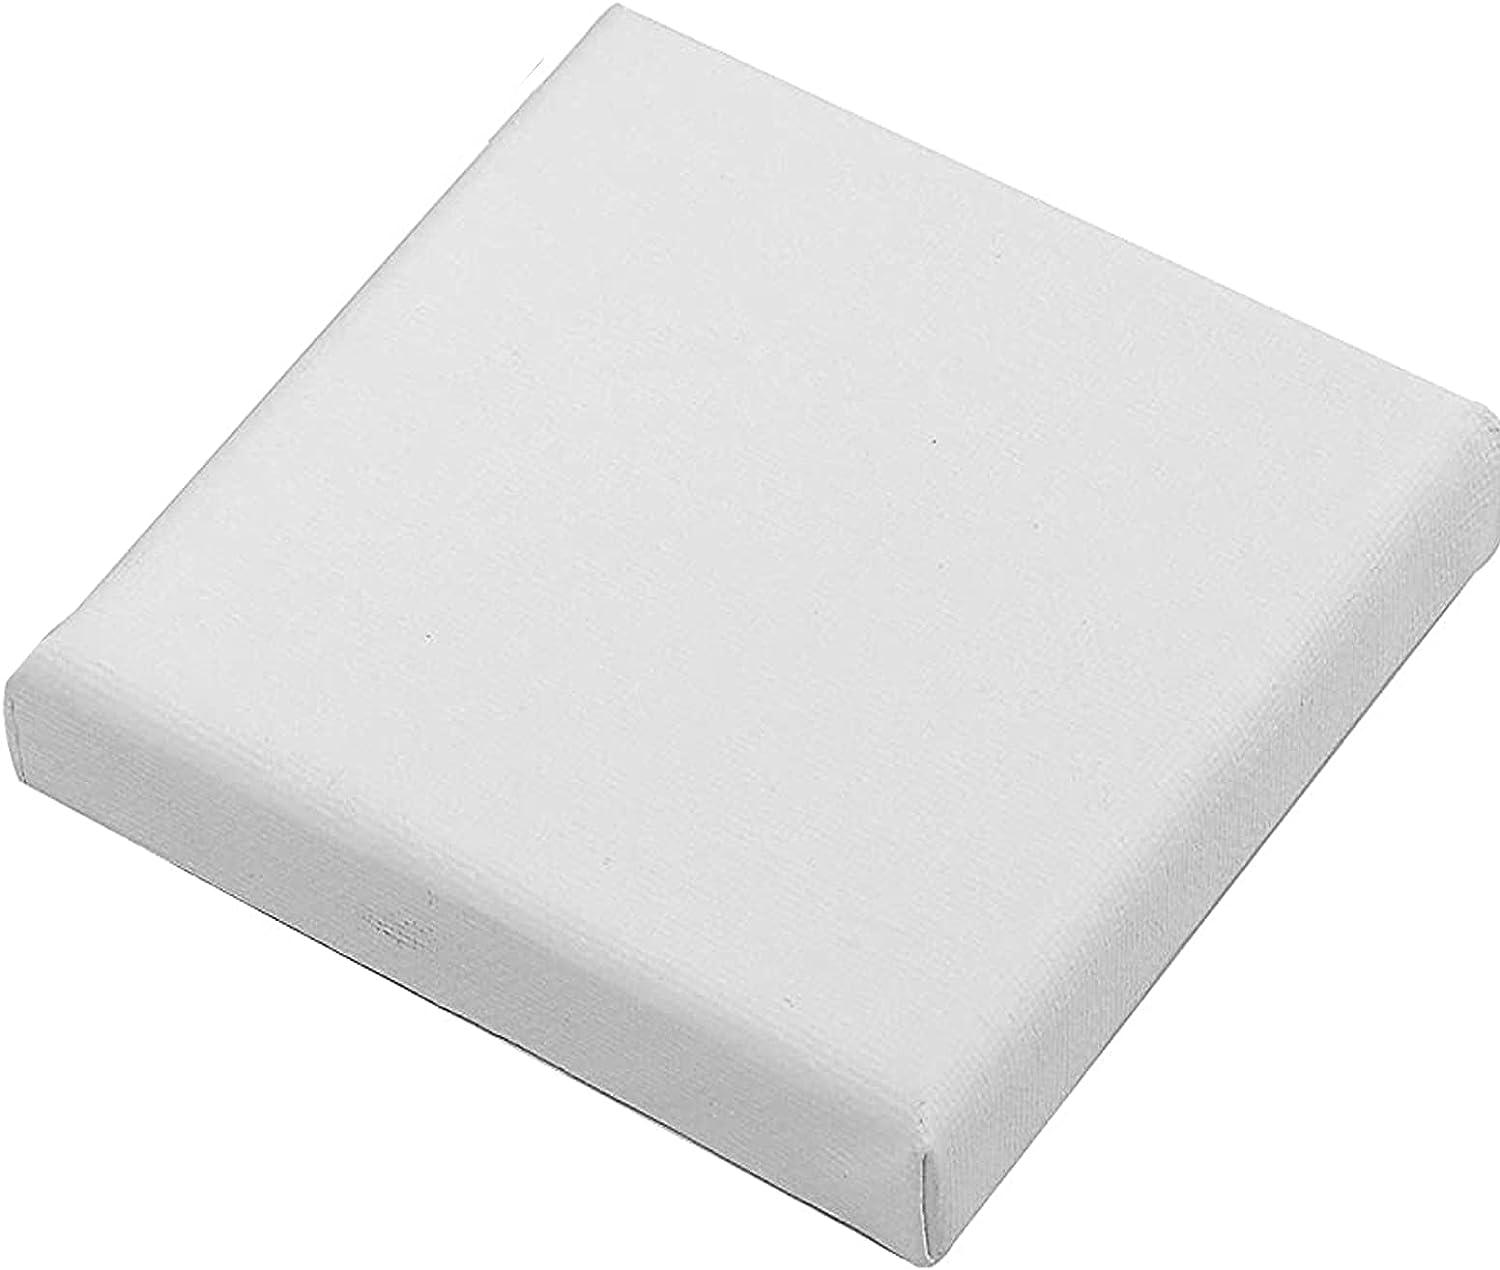 GenCrafts Stretched White Canvas Multi Pack - 4x4, Qatar